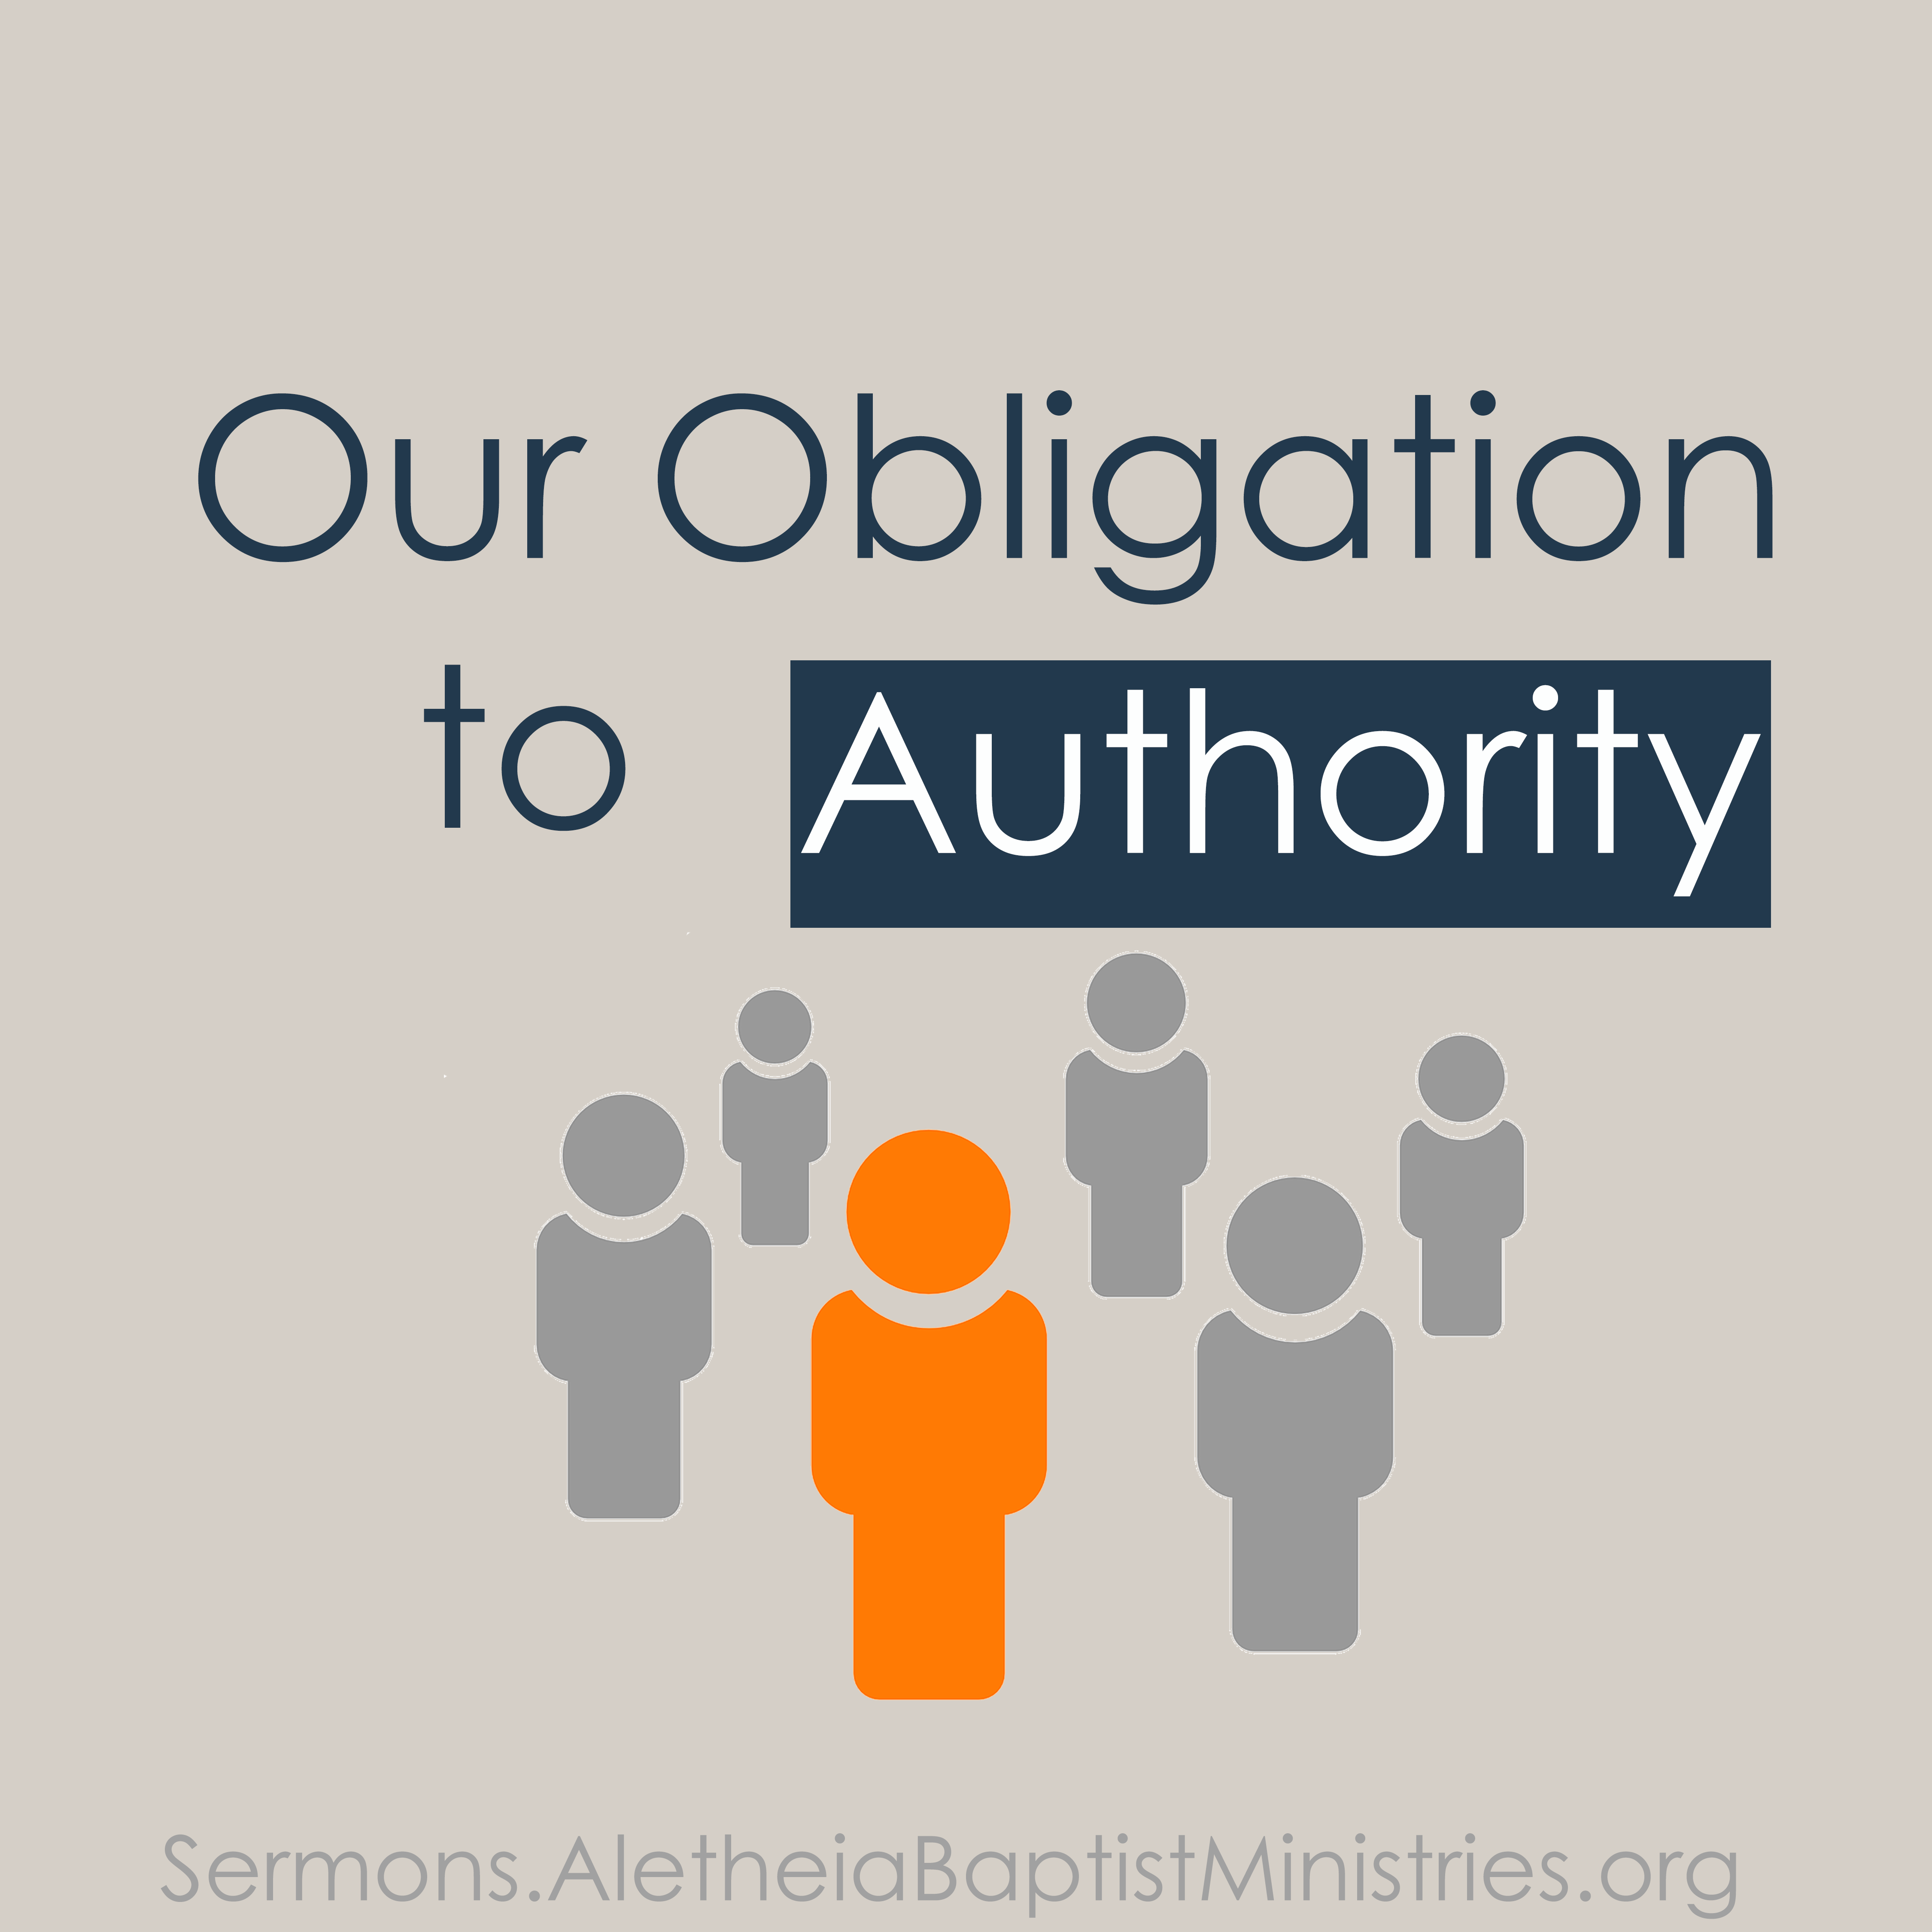 Our Obligation to Authority